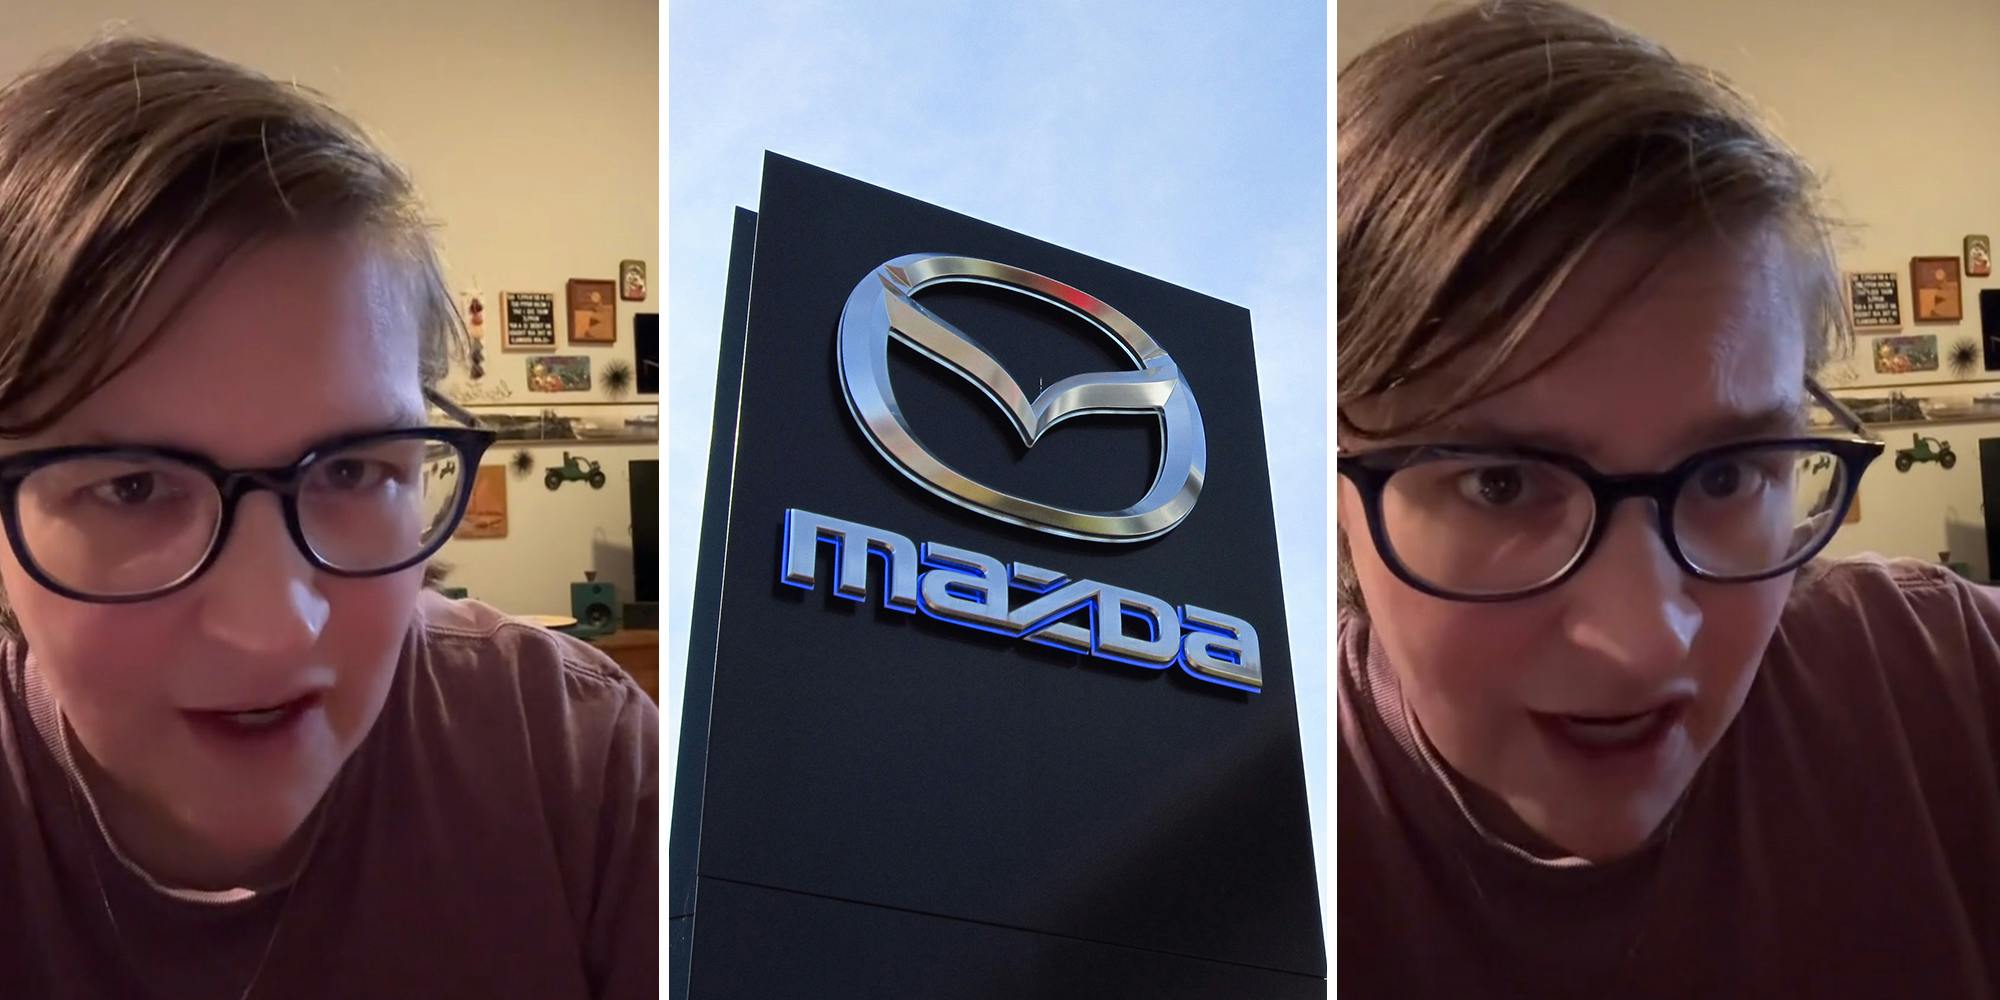 Mazda owner leaves car at dealership for repairs. It ends up 30 miles away after closing time